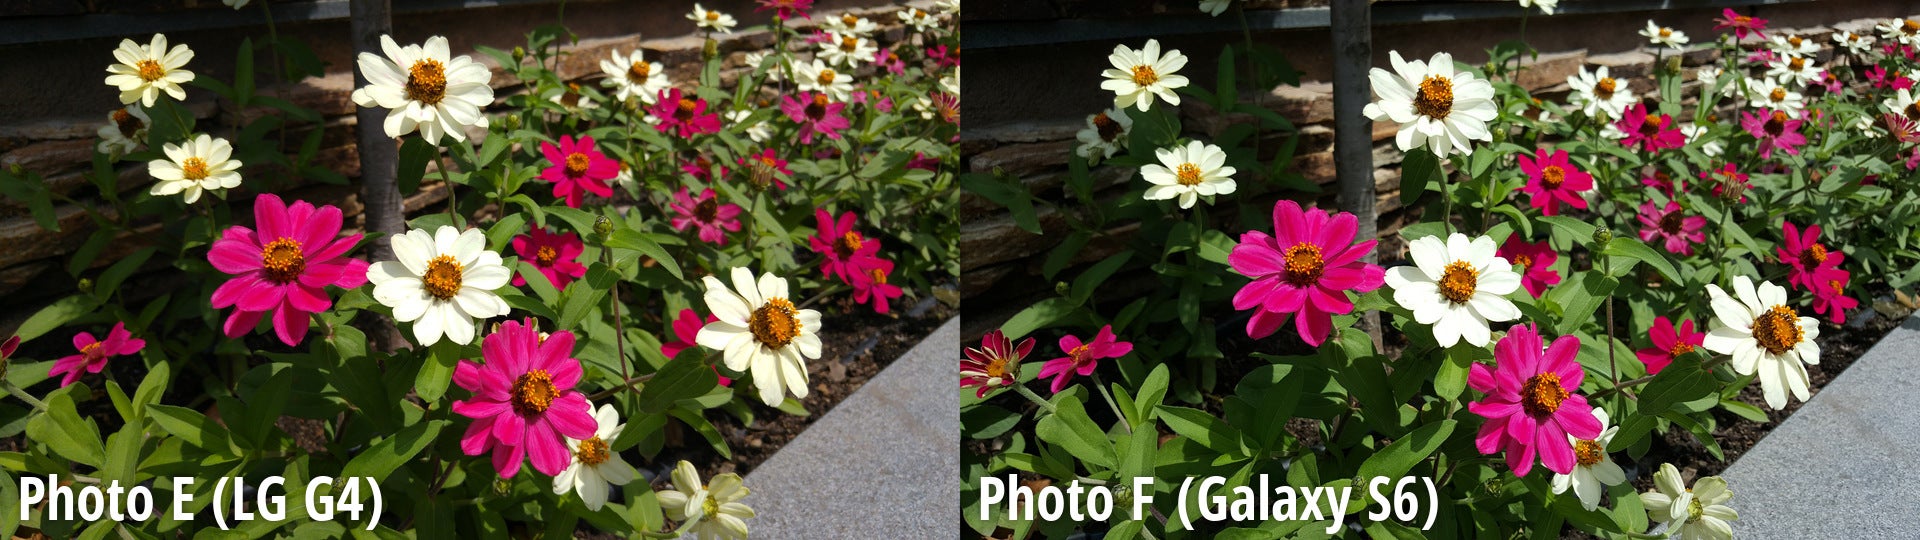 Side-by-side preview - Samsung Galaxy S6 wins another blind camera comparison, LG G4 is close second